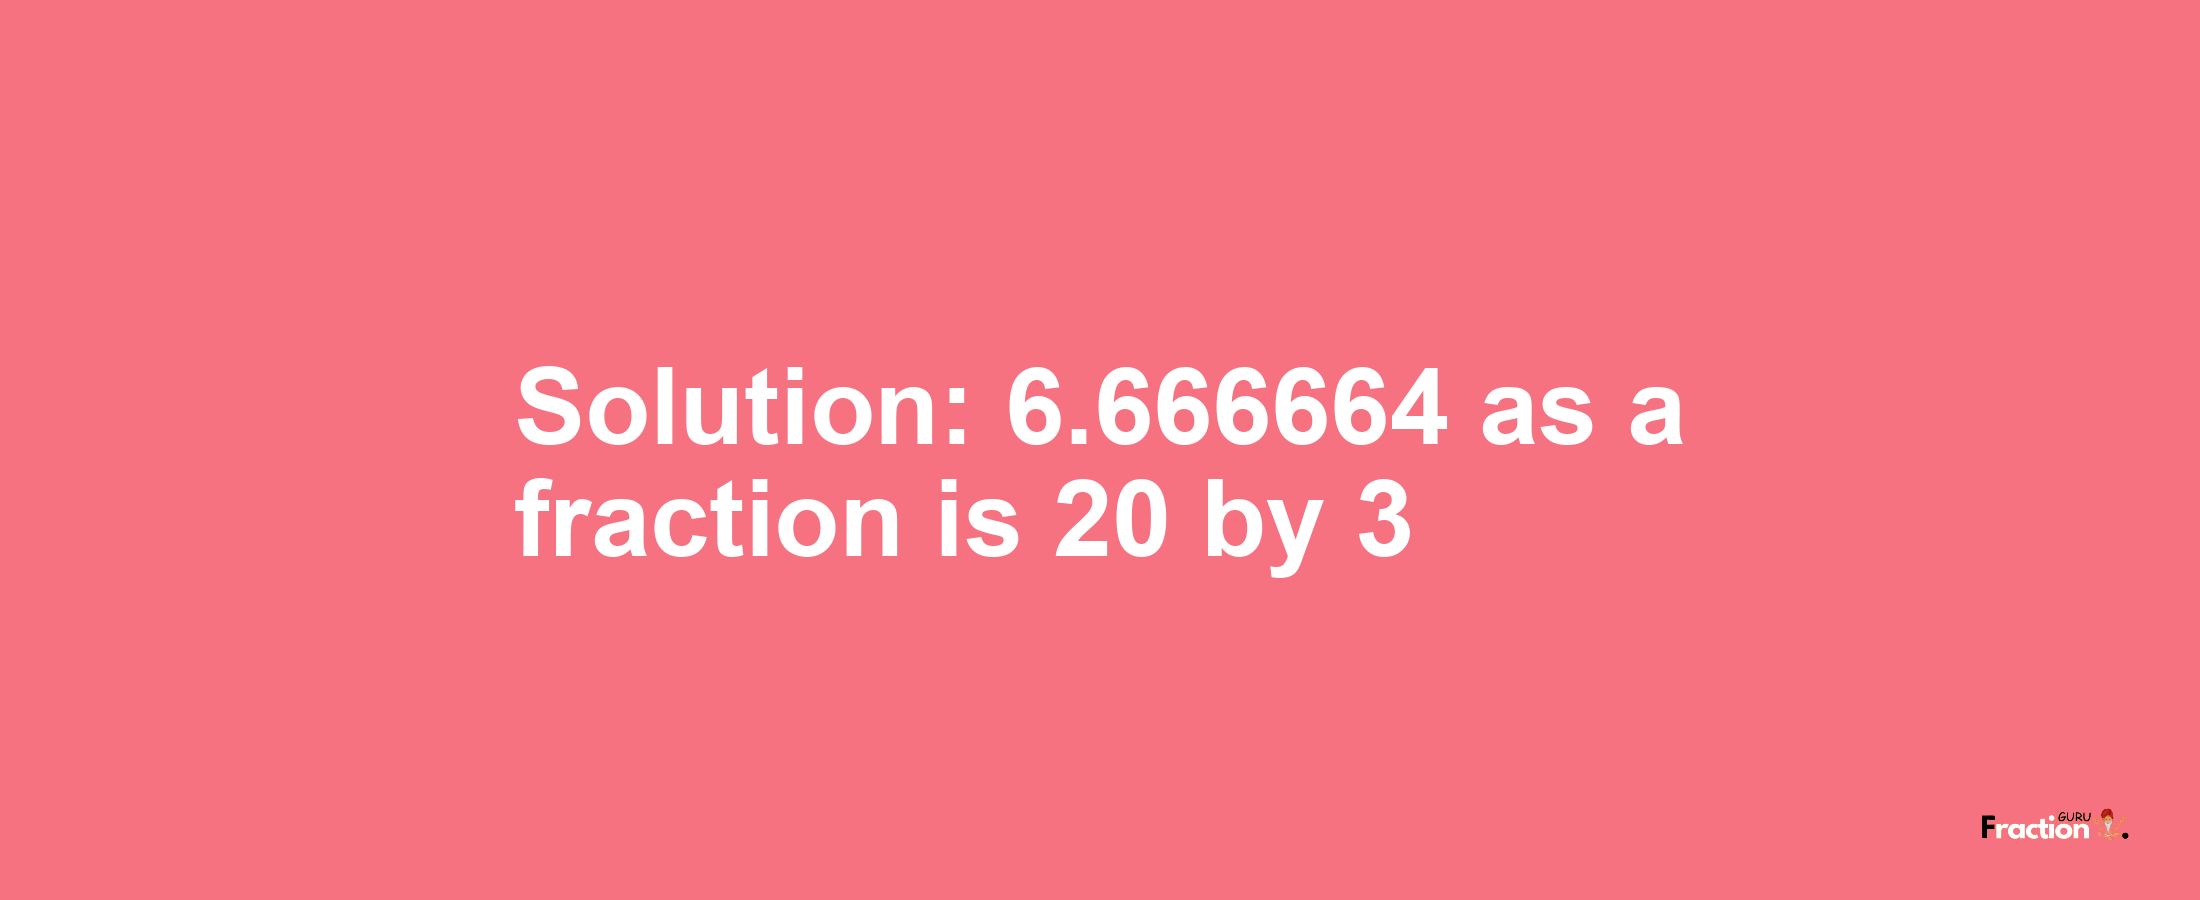 Solution:6.666664 as a fraction is 20/3